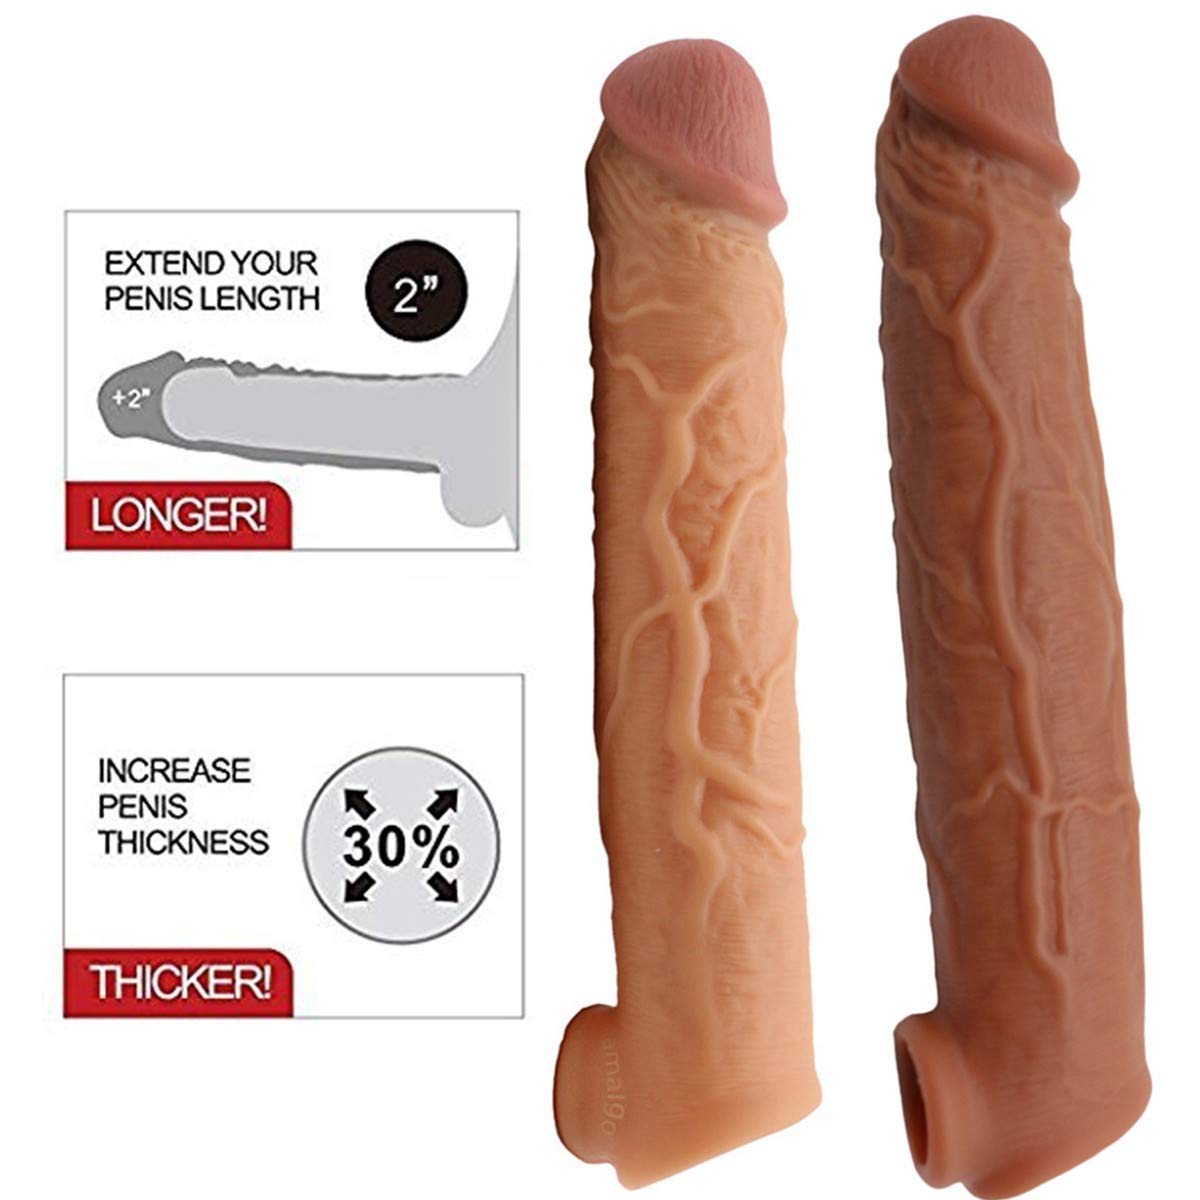 angela primeaux recommends what does a 12 inch penis look like pic